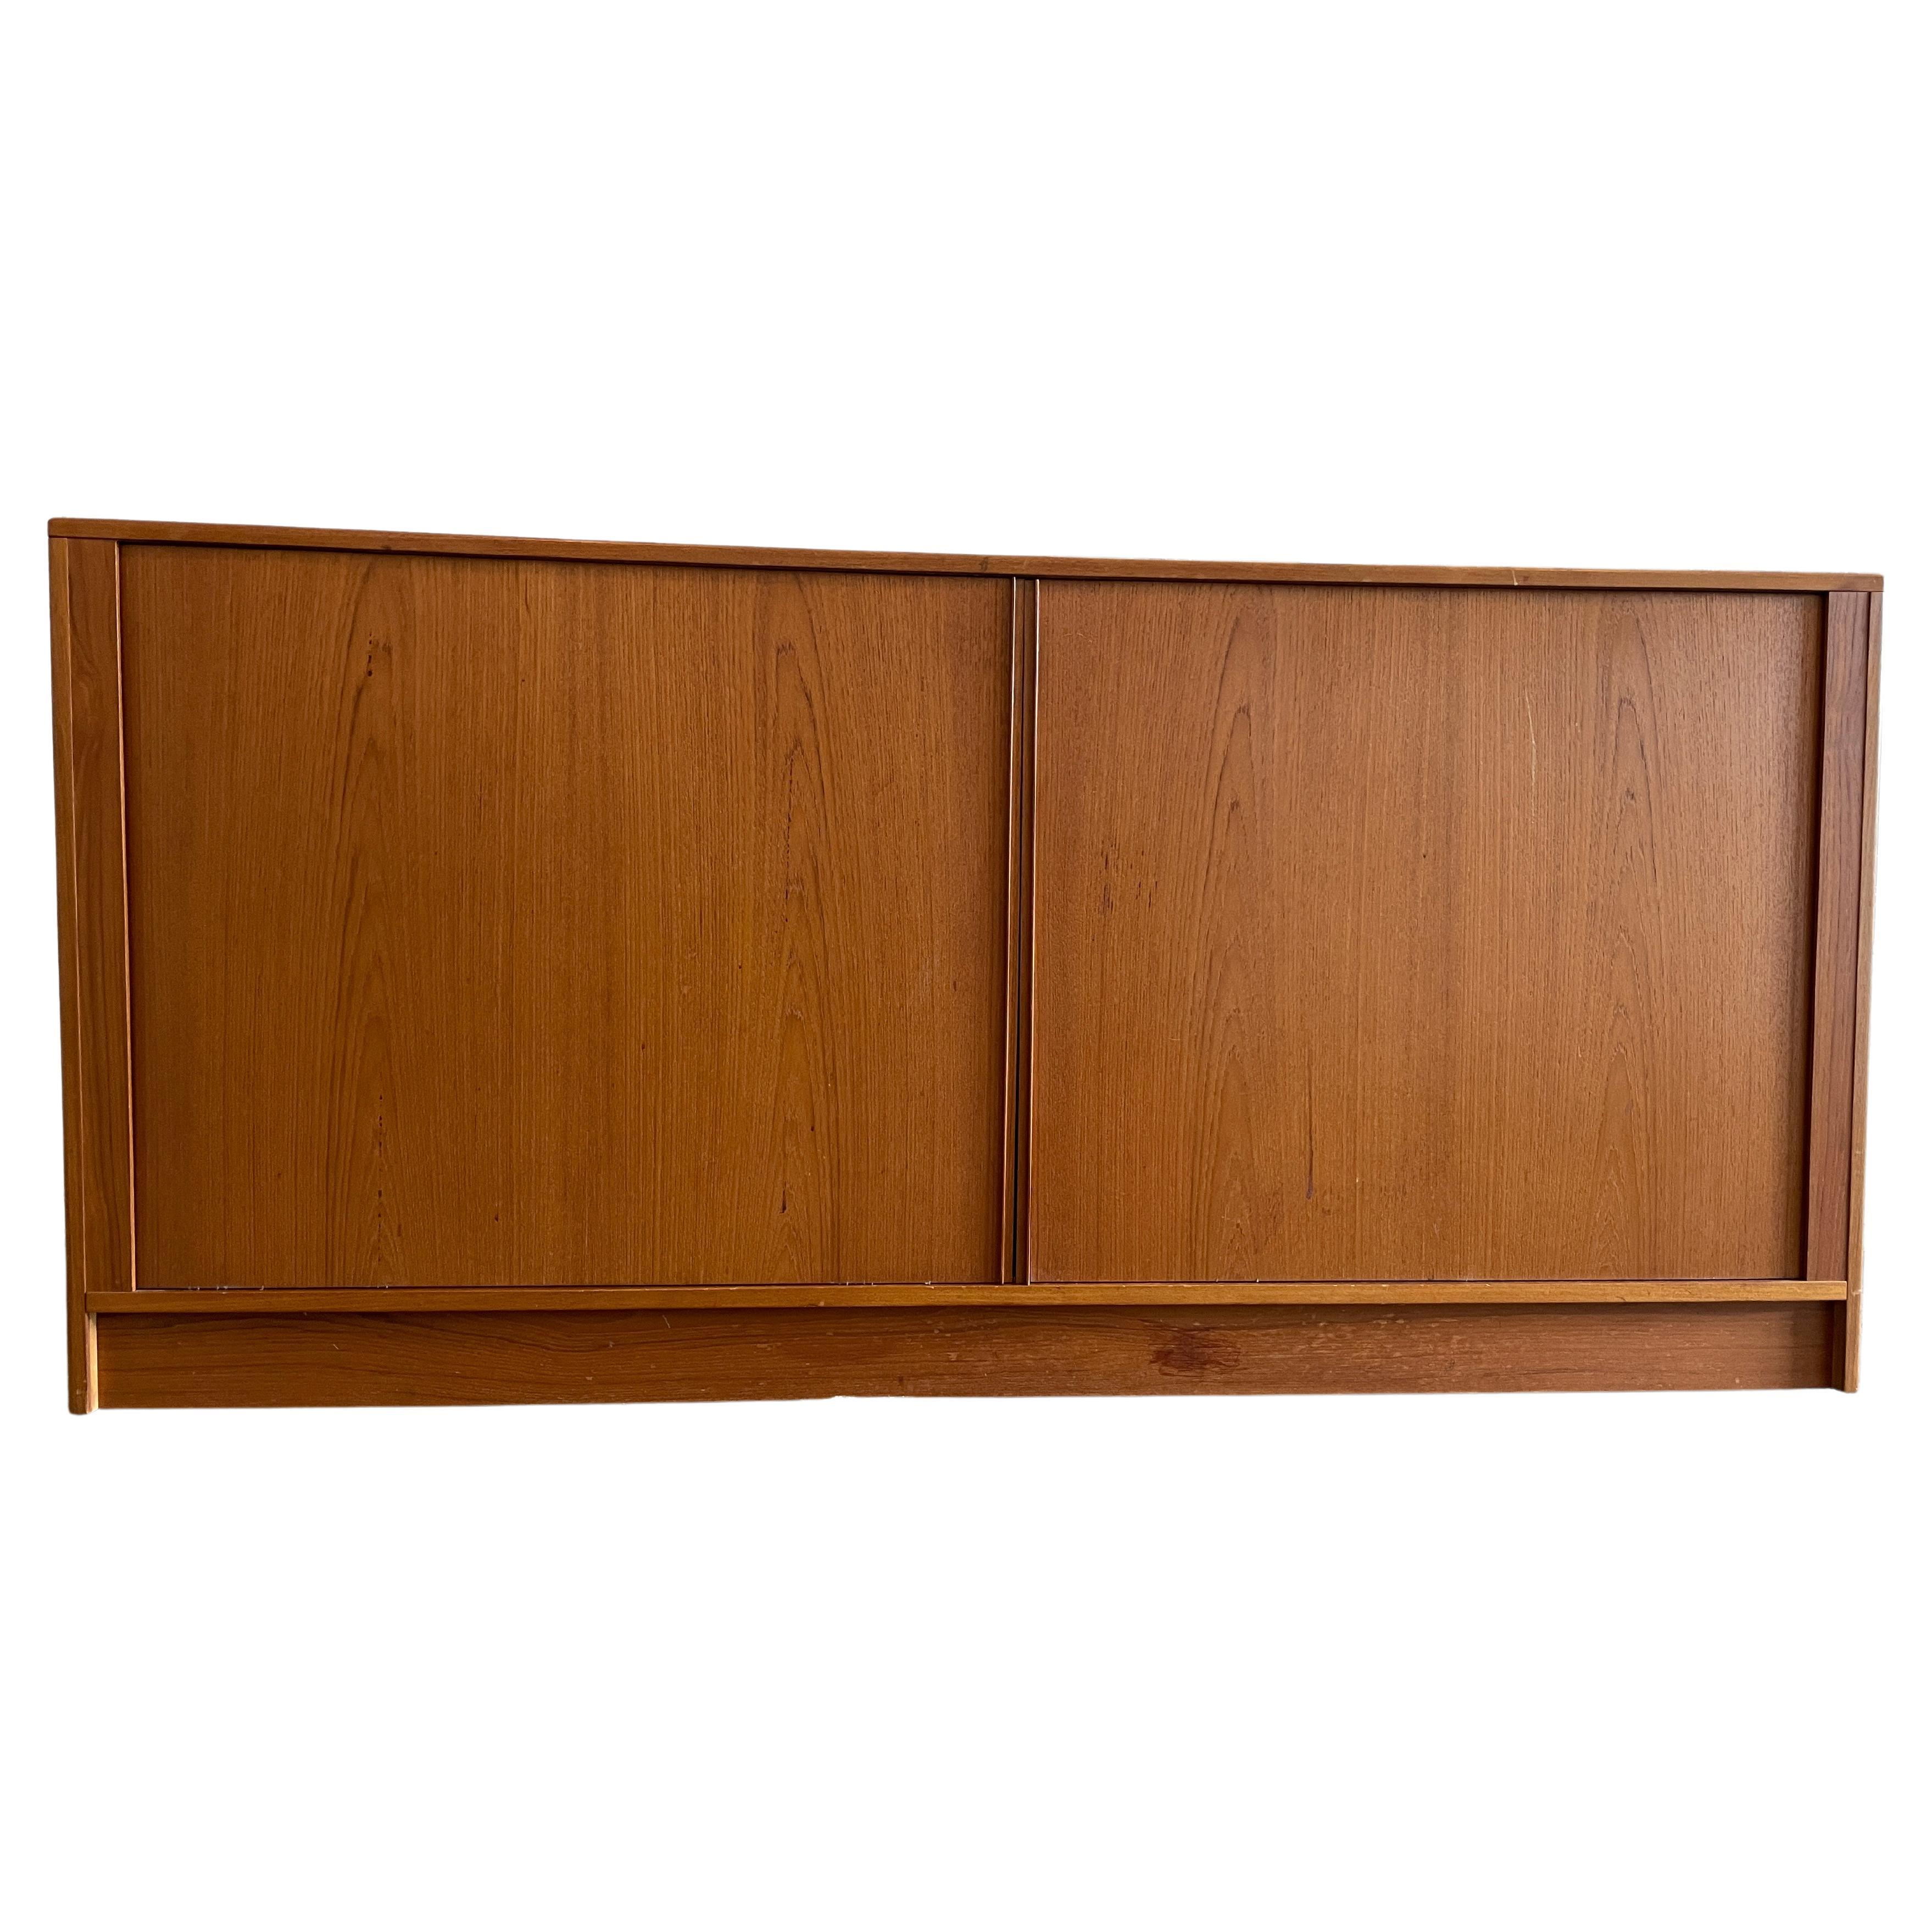 Mid-century Danish modern Tambour door credenza dresser with 12 drawer. Light teak credenza or dresser with front sliding tambour doors behind the doors are 12 teak drawers with 2 adjustable shelves. All drawers are clean and slide smooth. Made in